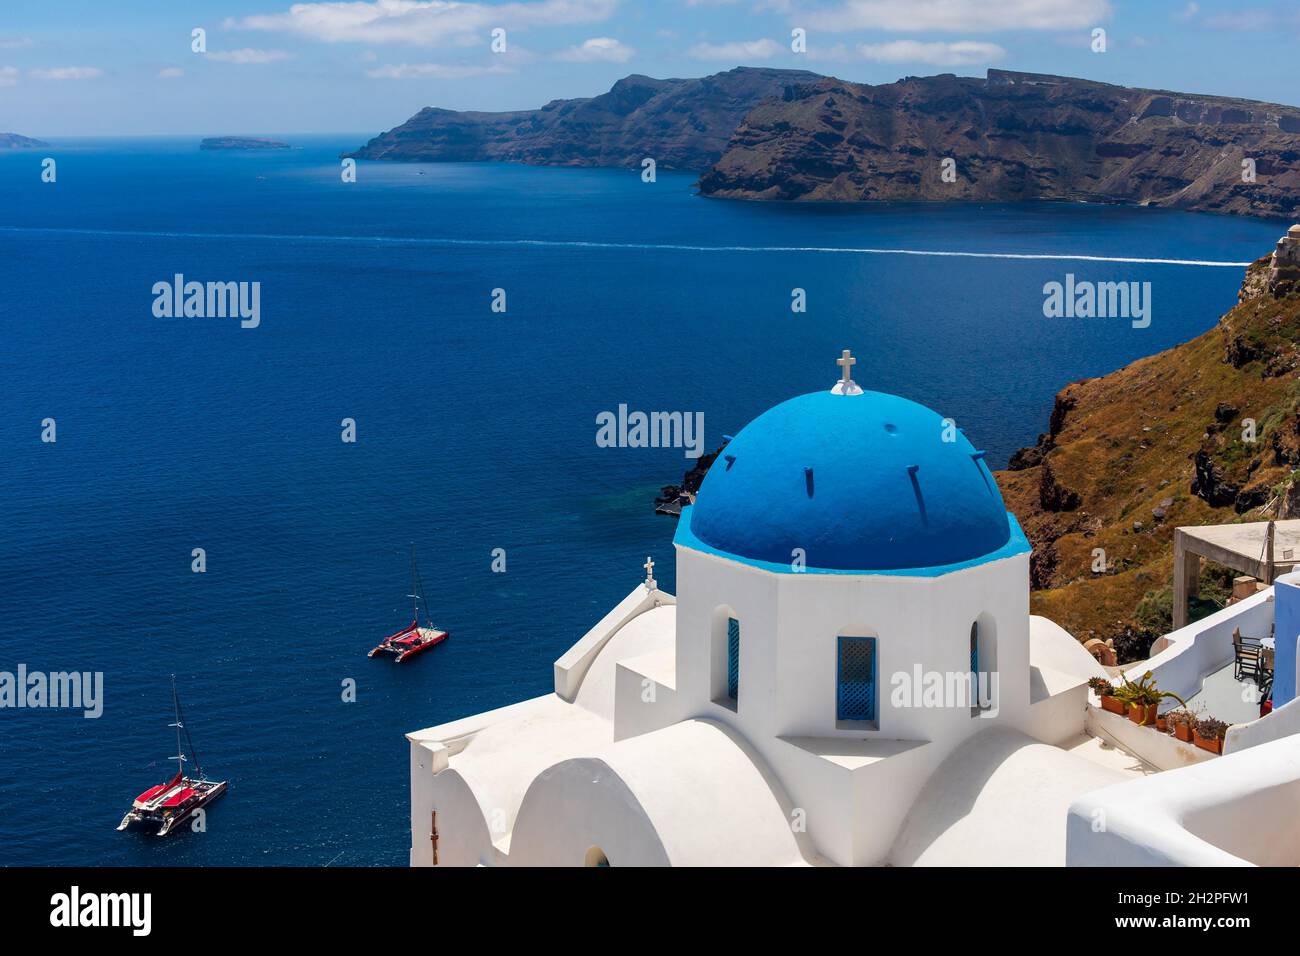 GREECE, ARCHIPELAGO OF CYCLADES, ISLAND OF SANTORIN, A CHAPEL OF THE VILLAGE OF OIA PERCH ON THE CLIFF Stock Photo